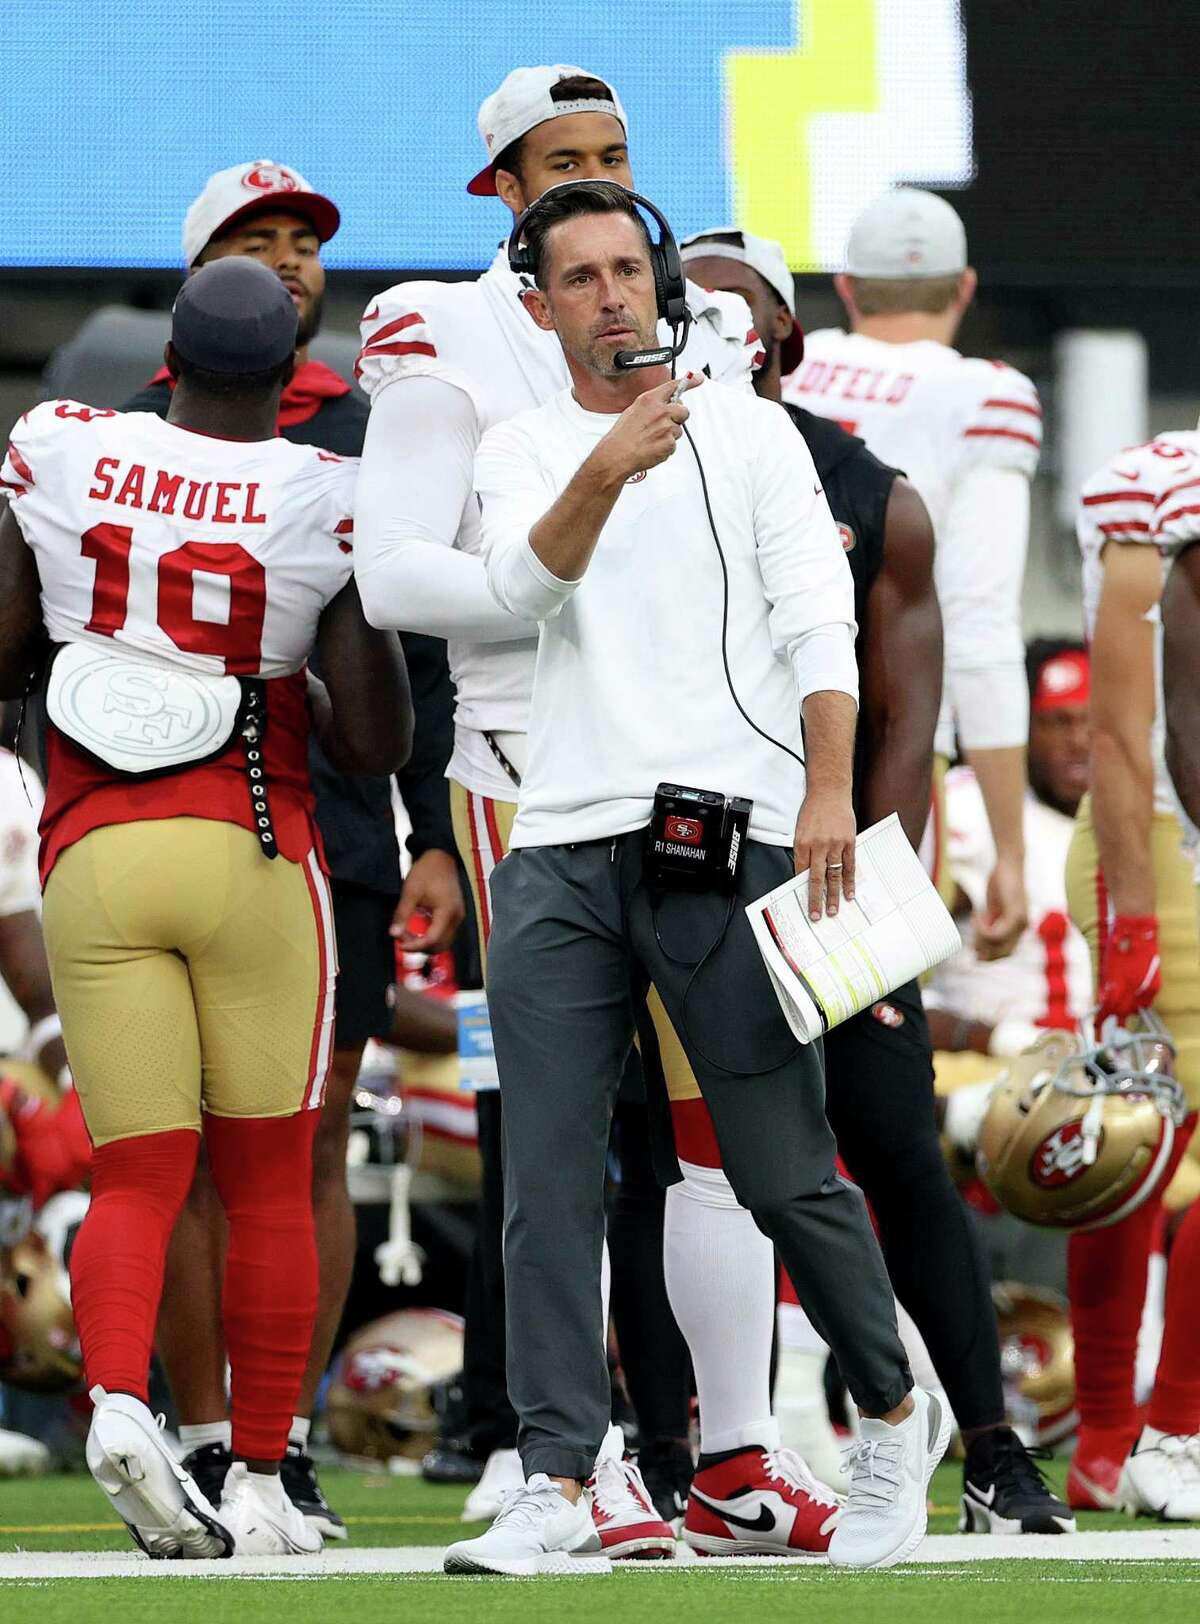 INGLEWOOD, CALIFORNIA - AUGUST 22: Head coach Kyle Shanahan of the San Francisco 49ers on the sidelines during the first half of a preseason game between the Los Angeles Chargers and the San Francisco 49ers at SoFi Stadium on August 22, 2021 in Inglewood, California. (Photo by Harry How/Getty Images)